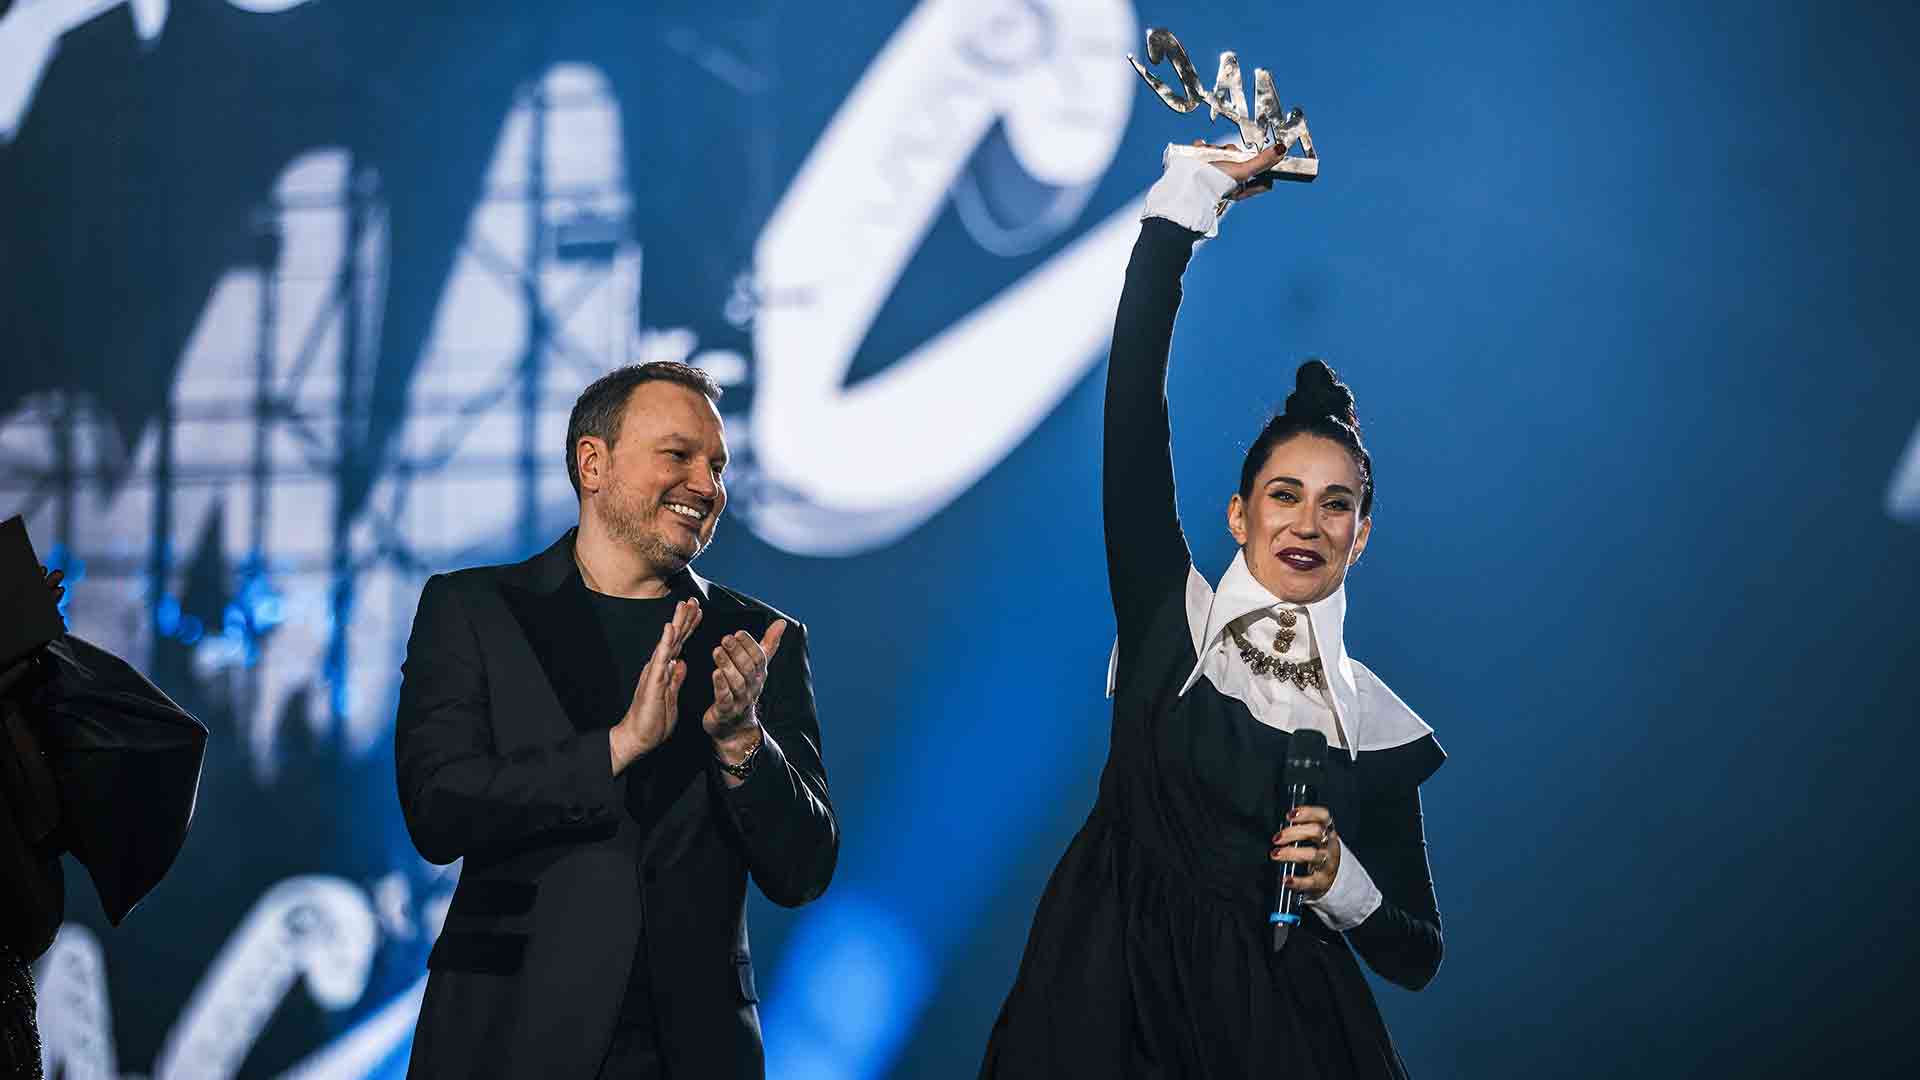 The third edition of the Music Awards Ceremony (MAC) was held